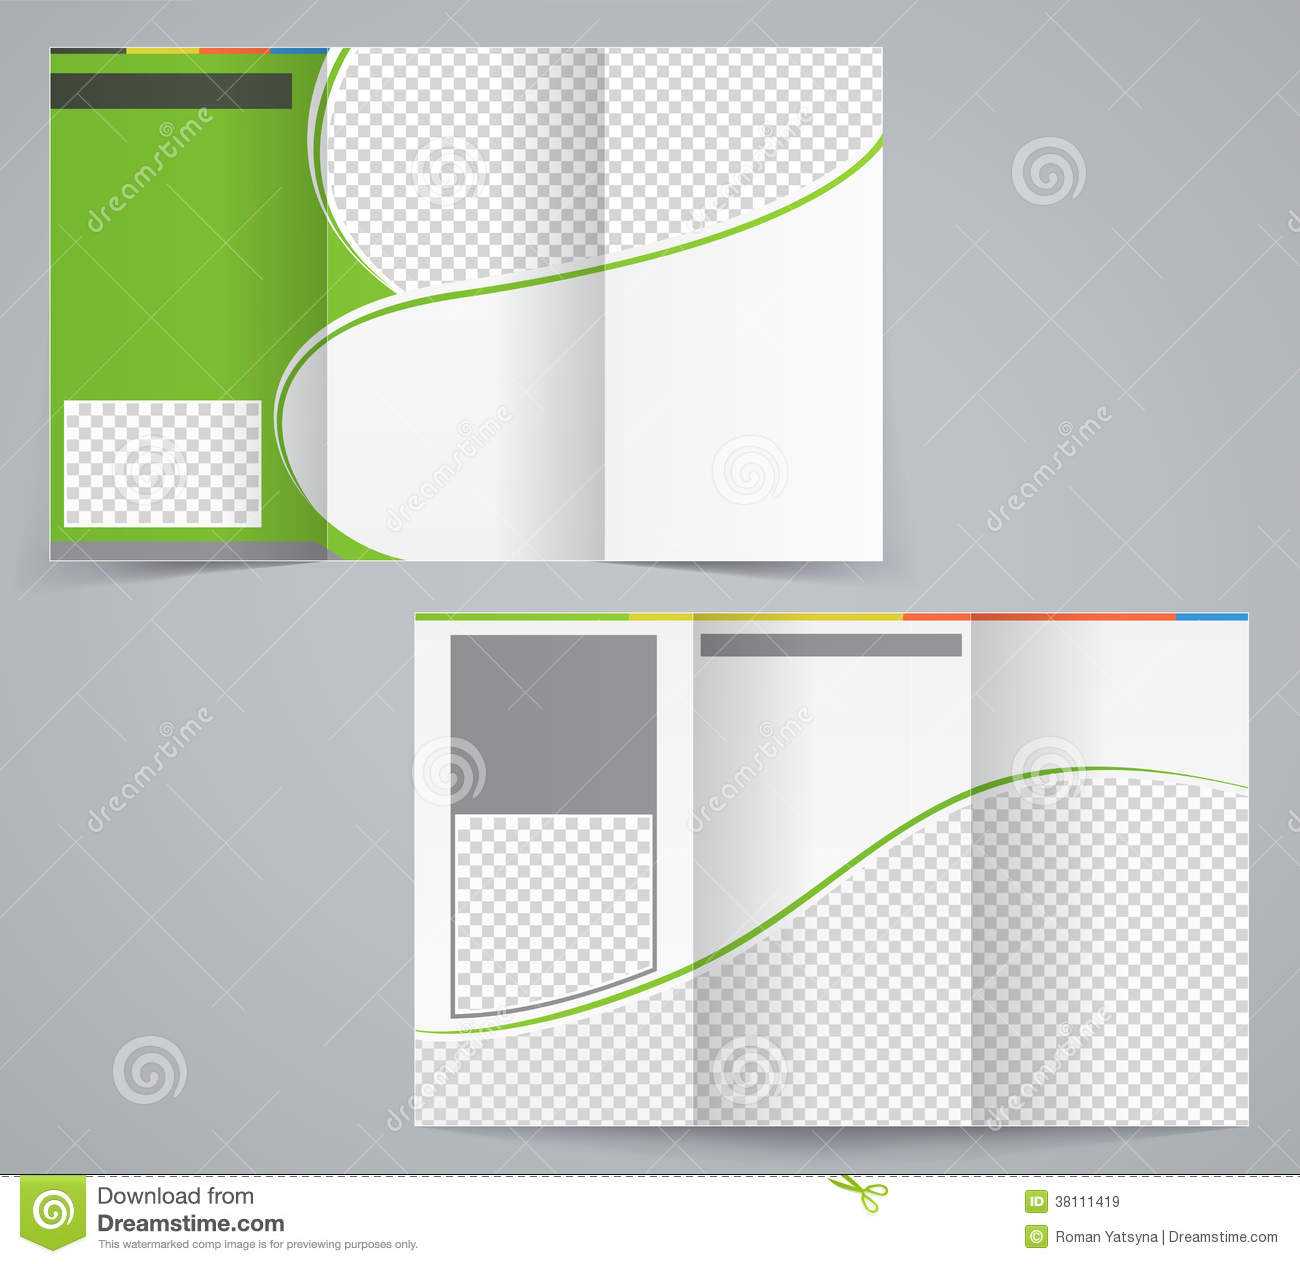 Tri Fold Business Brochure Template, Vector Green Stock Pertaining To Illustrator Brochure Templates Free Download